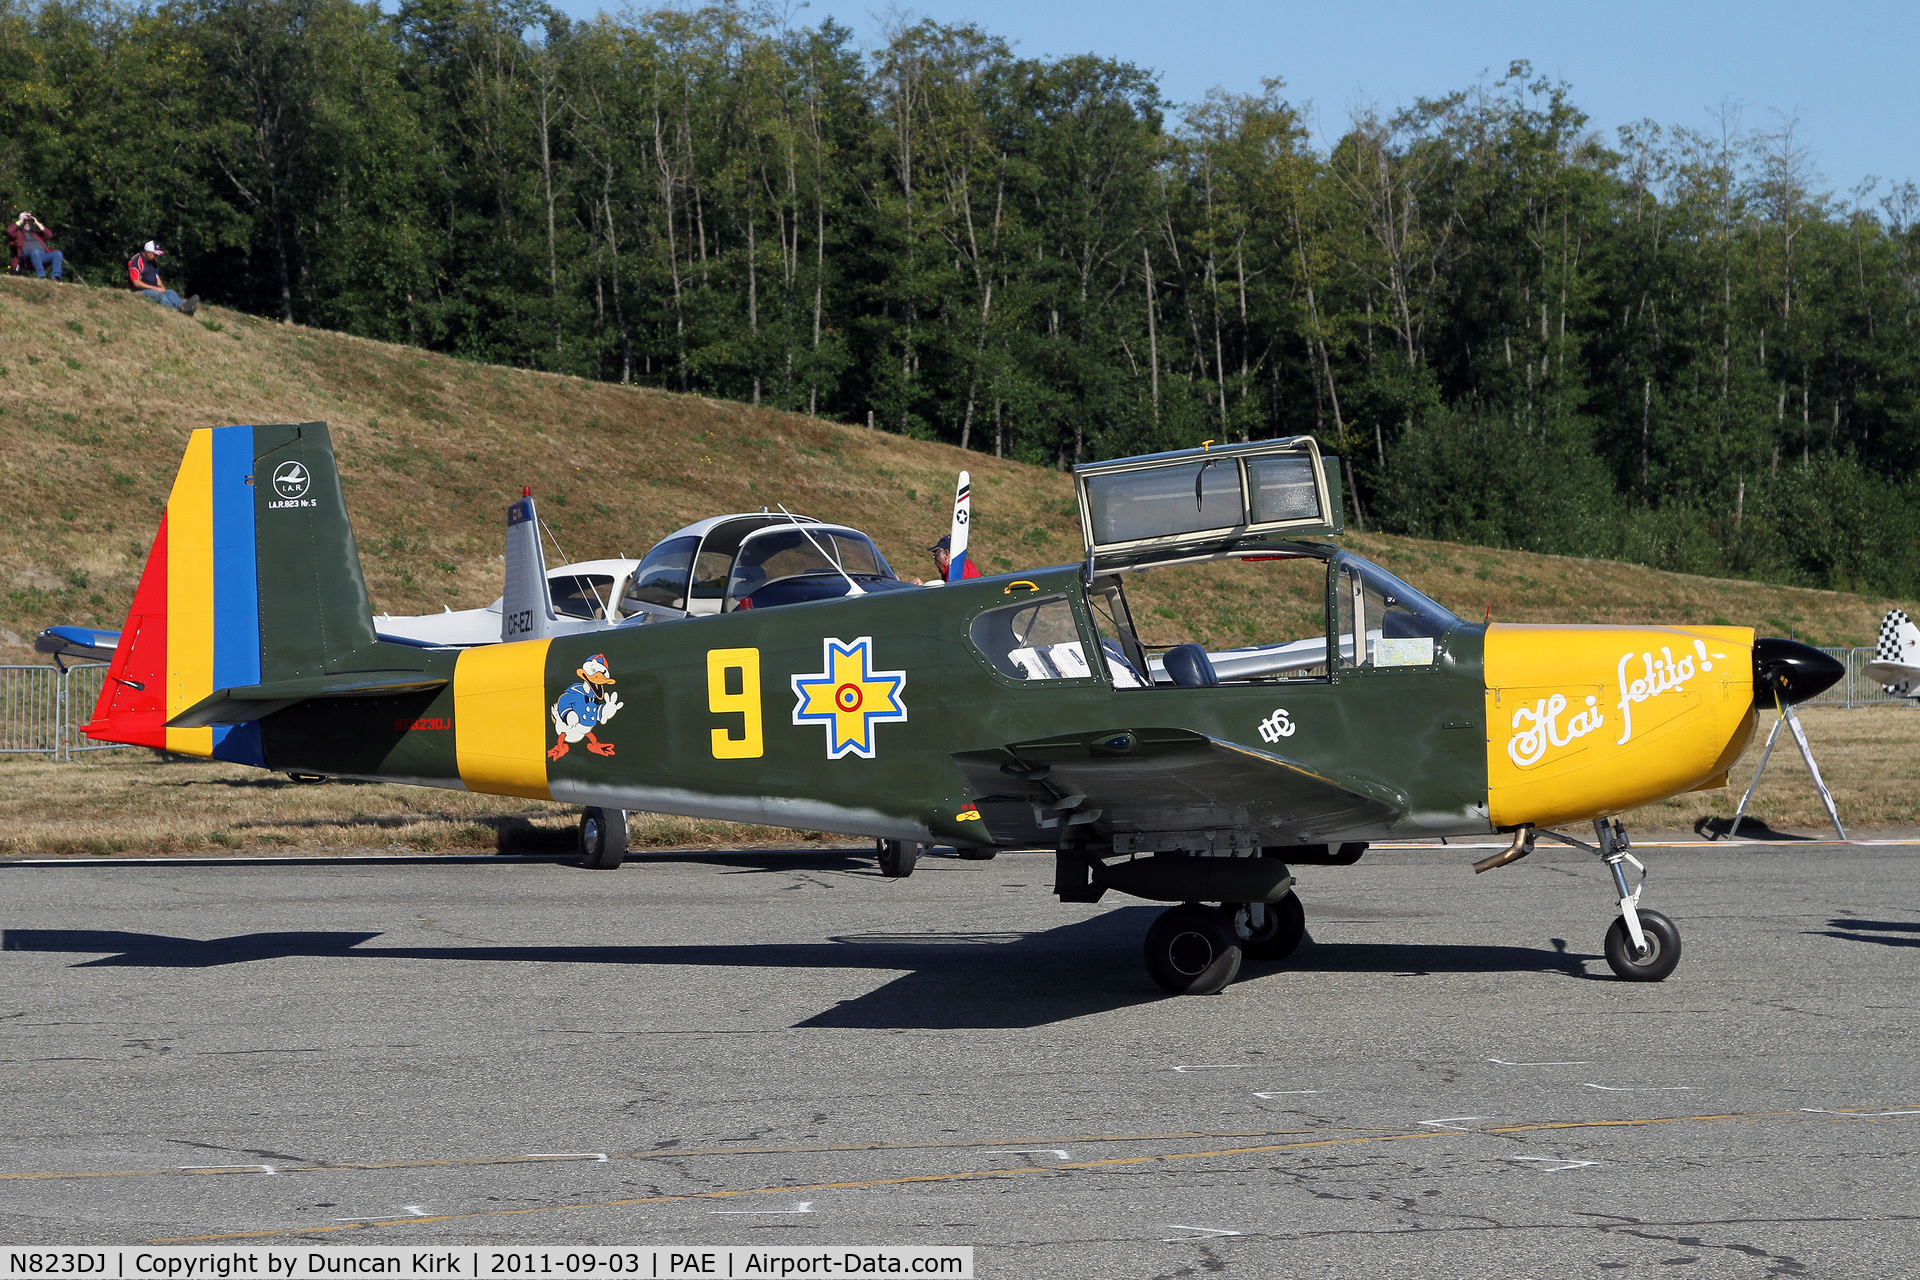 N823DJ, 1975 IAR IAR-823 C/N 05, This fine Romanian aircraft participated in the Vintage Aircraft Day festivities